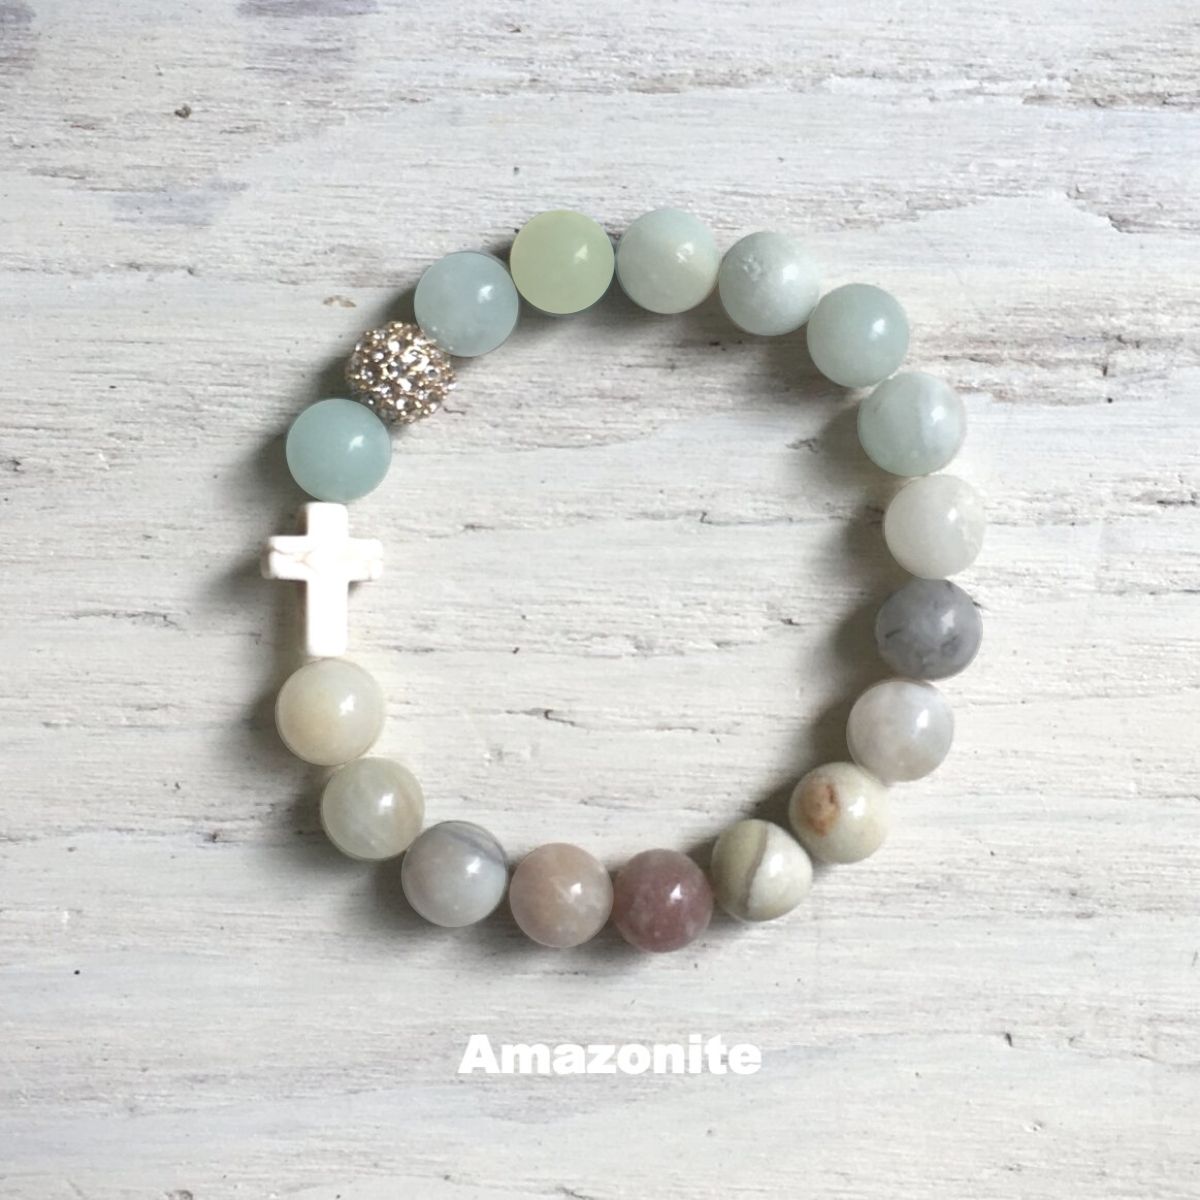 Thou Art With Me-Bracelet in Amazonite Christian Jewelry – hints